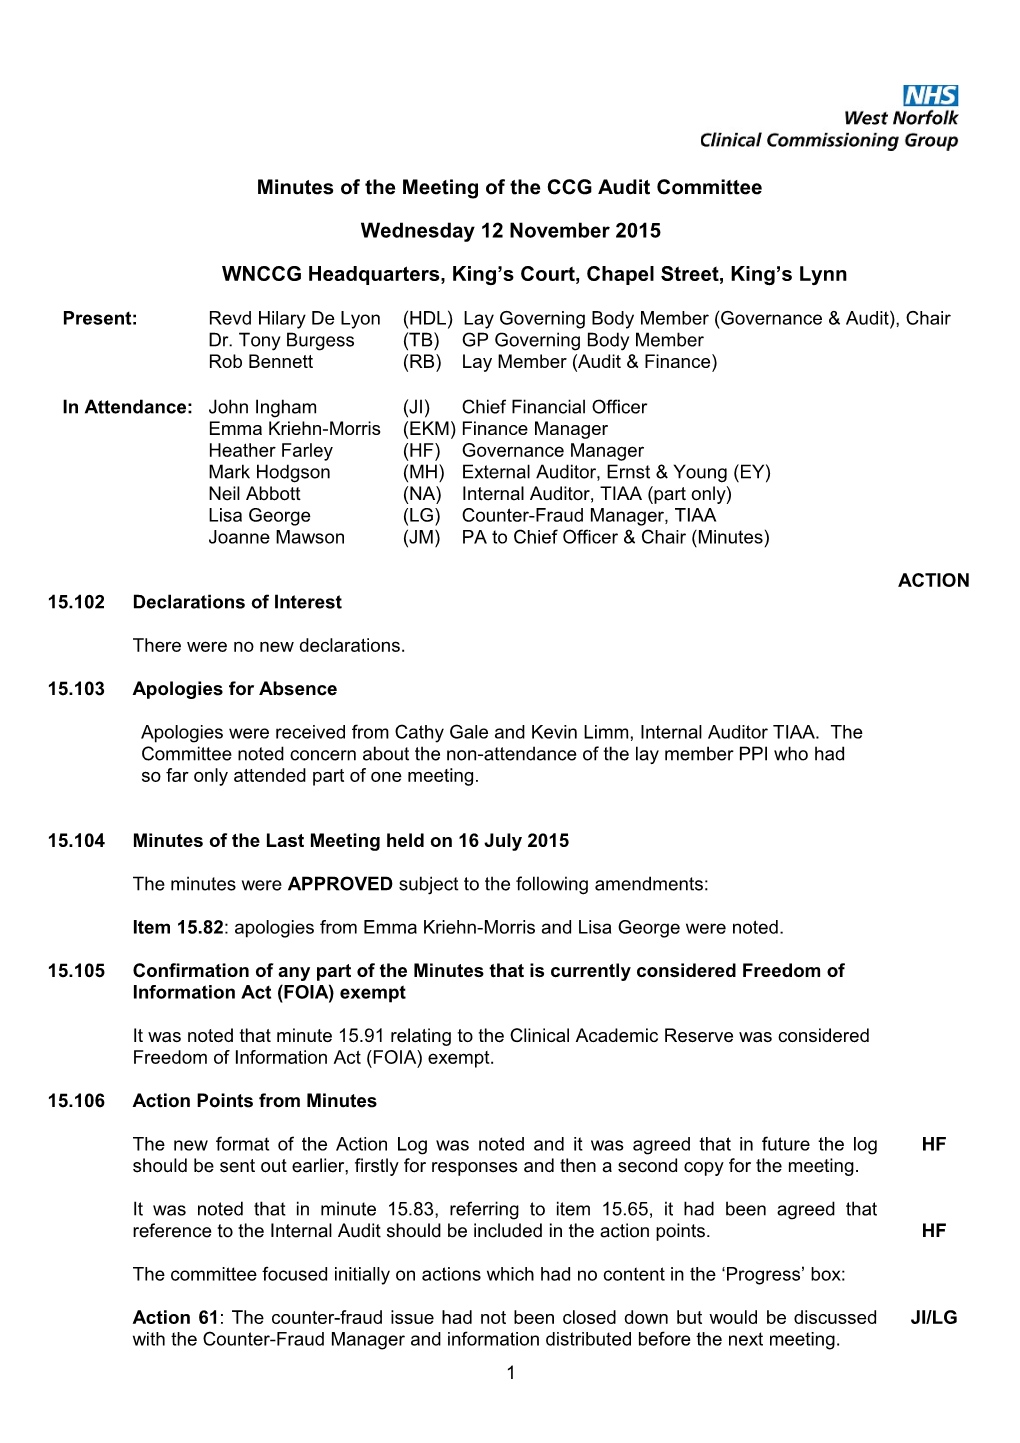 Minutes of the Meeting of the Audit Committee Held on Friday 26 November 2010 in Ground